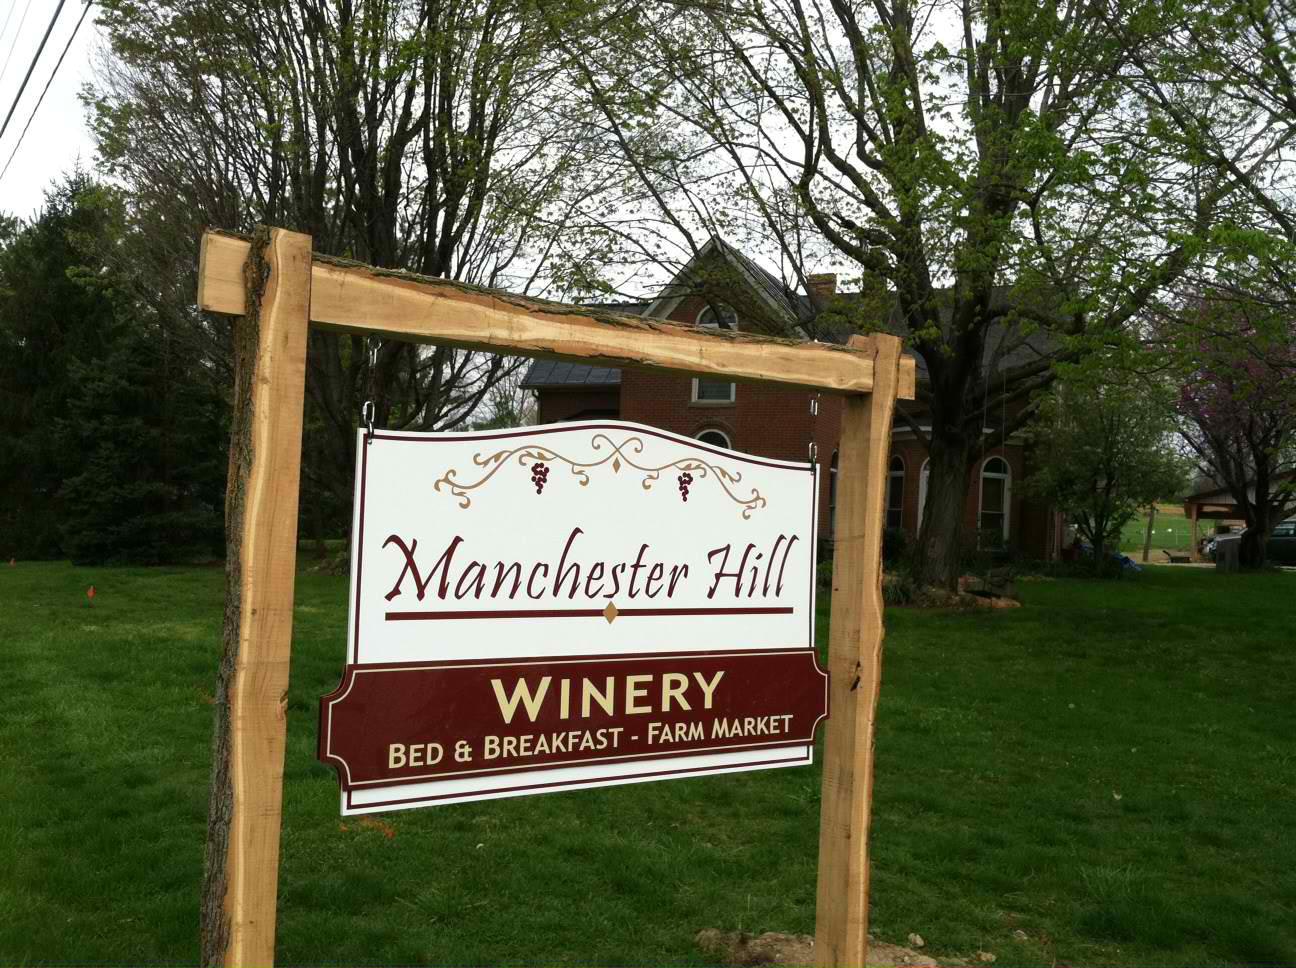 Manchester Hill Winery